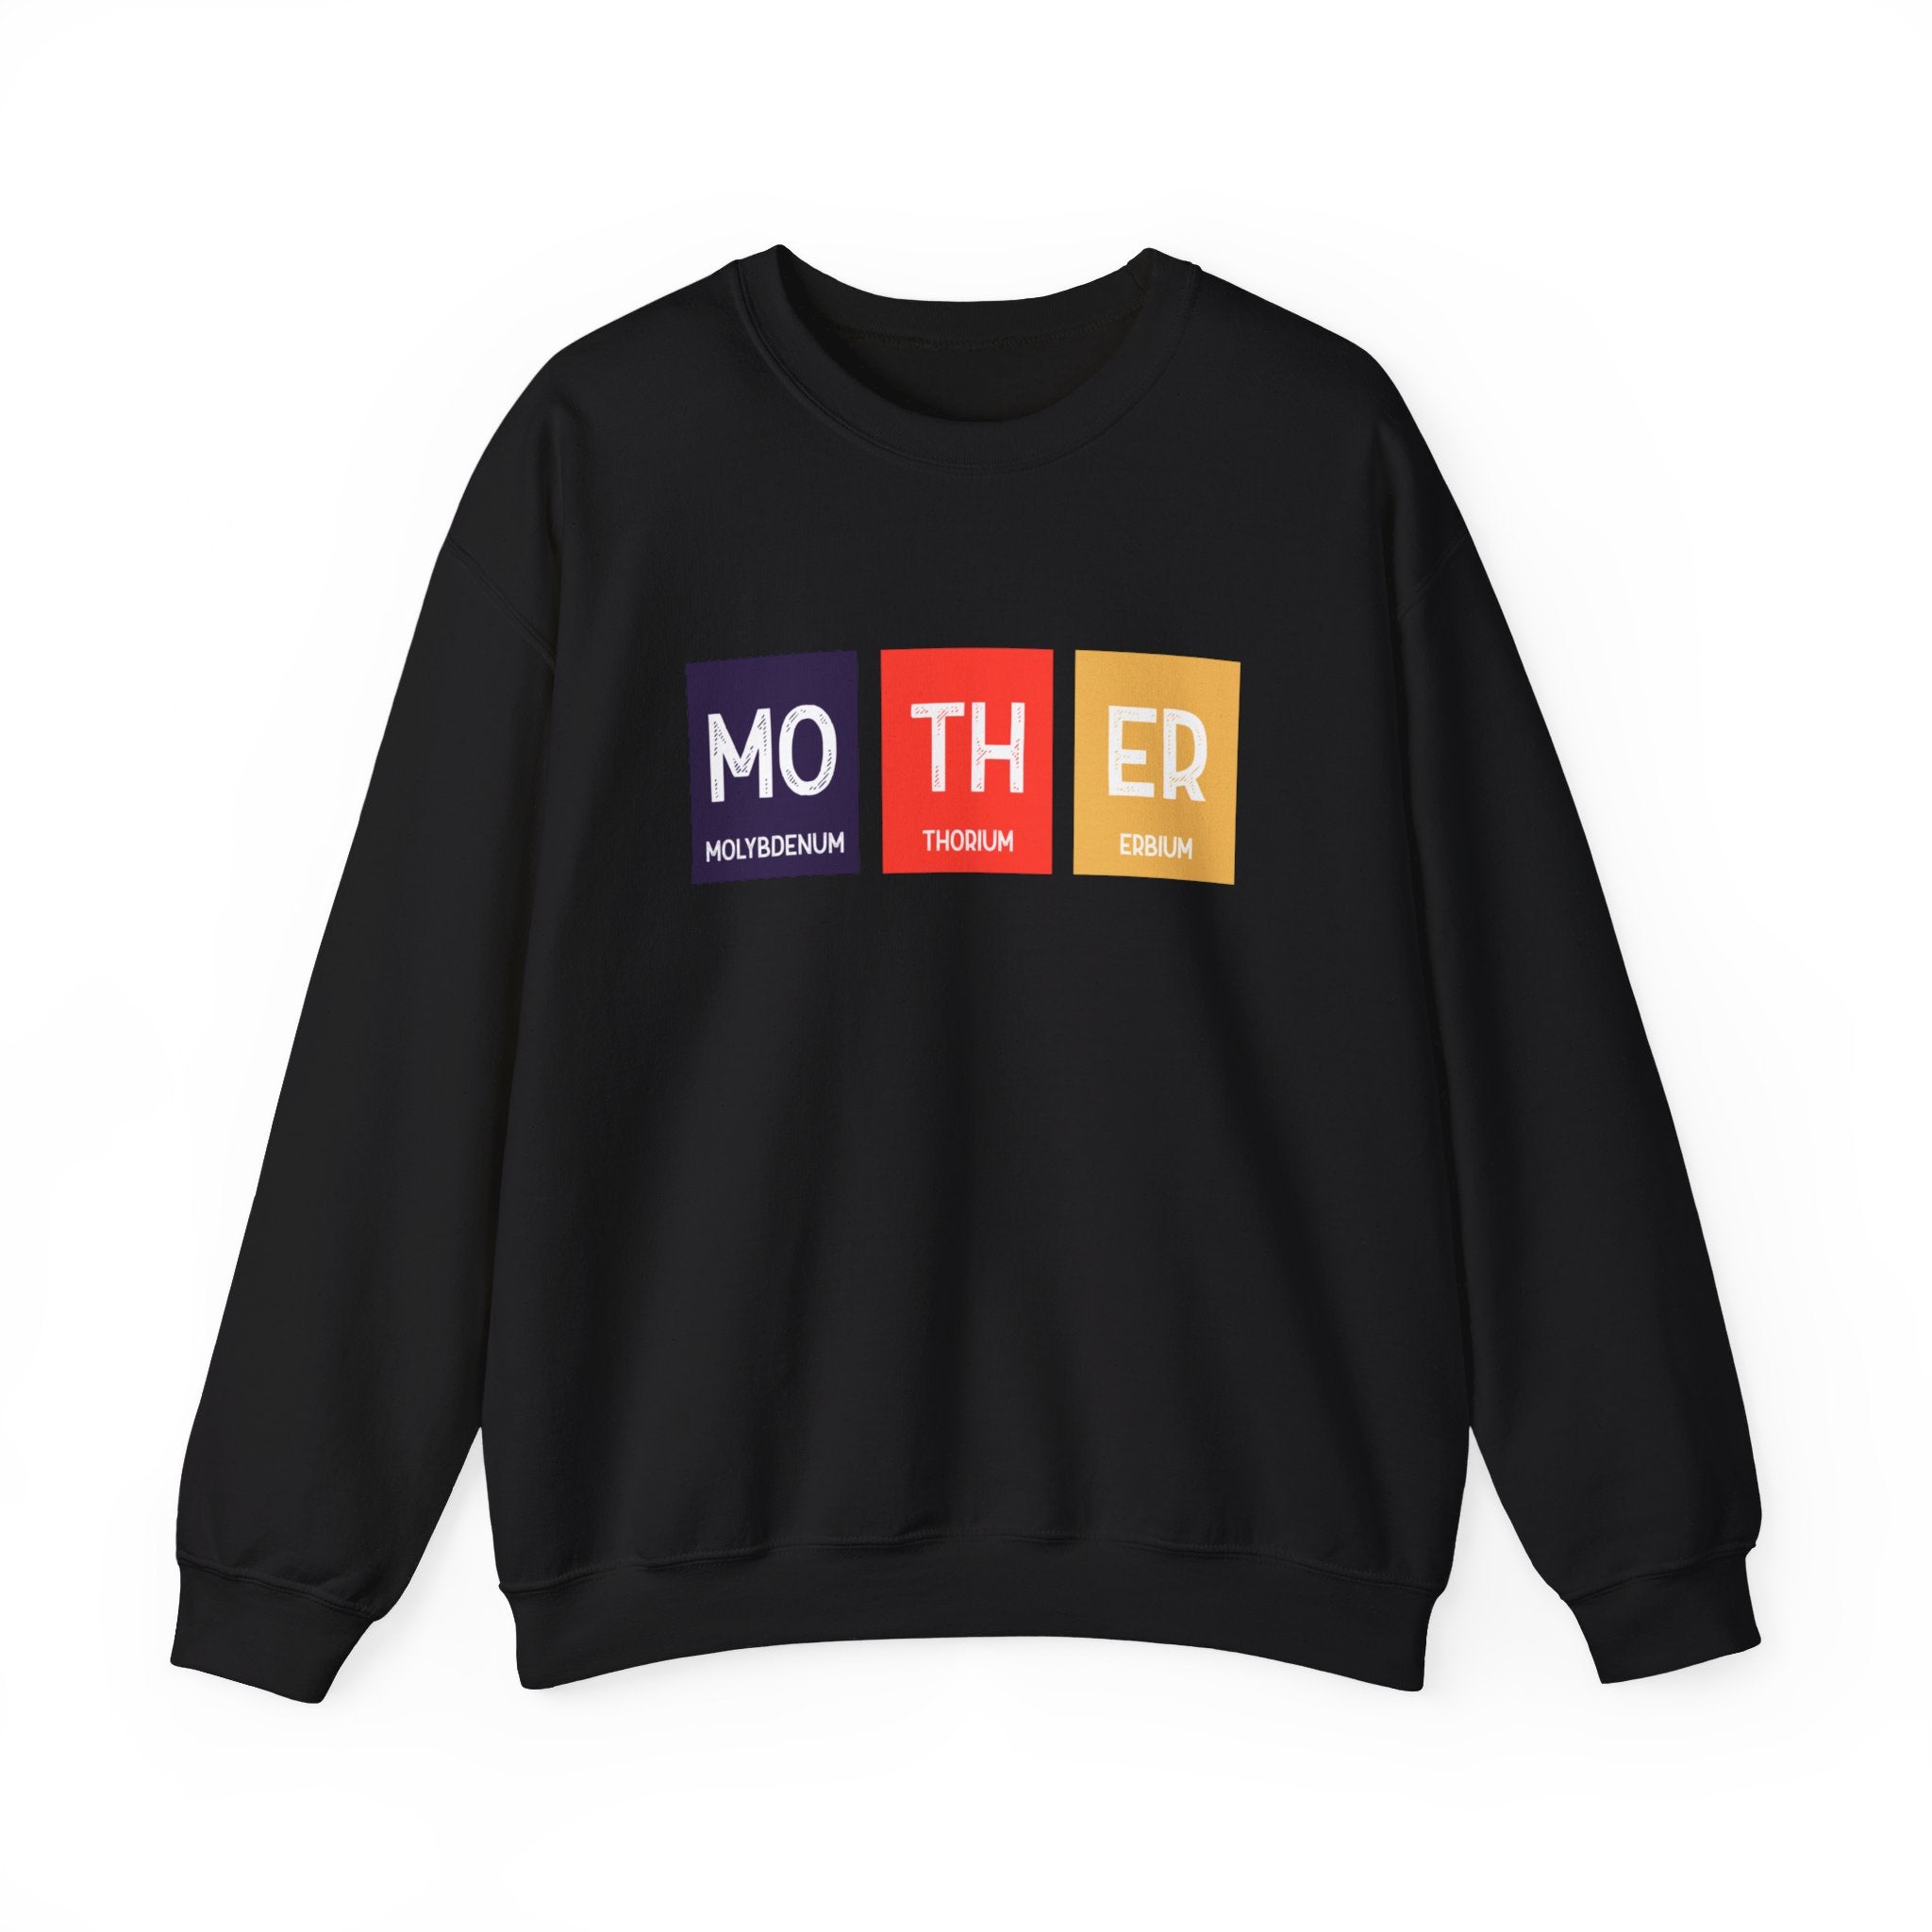 A cozy black Mo-TH-ER - Sweatshirt featuring the word "MOTHER" using periodic table element symbols for molybdenum, thorium, and erbium, printed in stylish colored blocks.